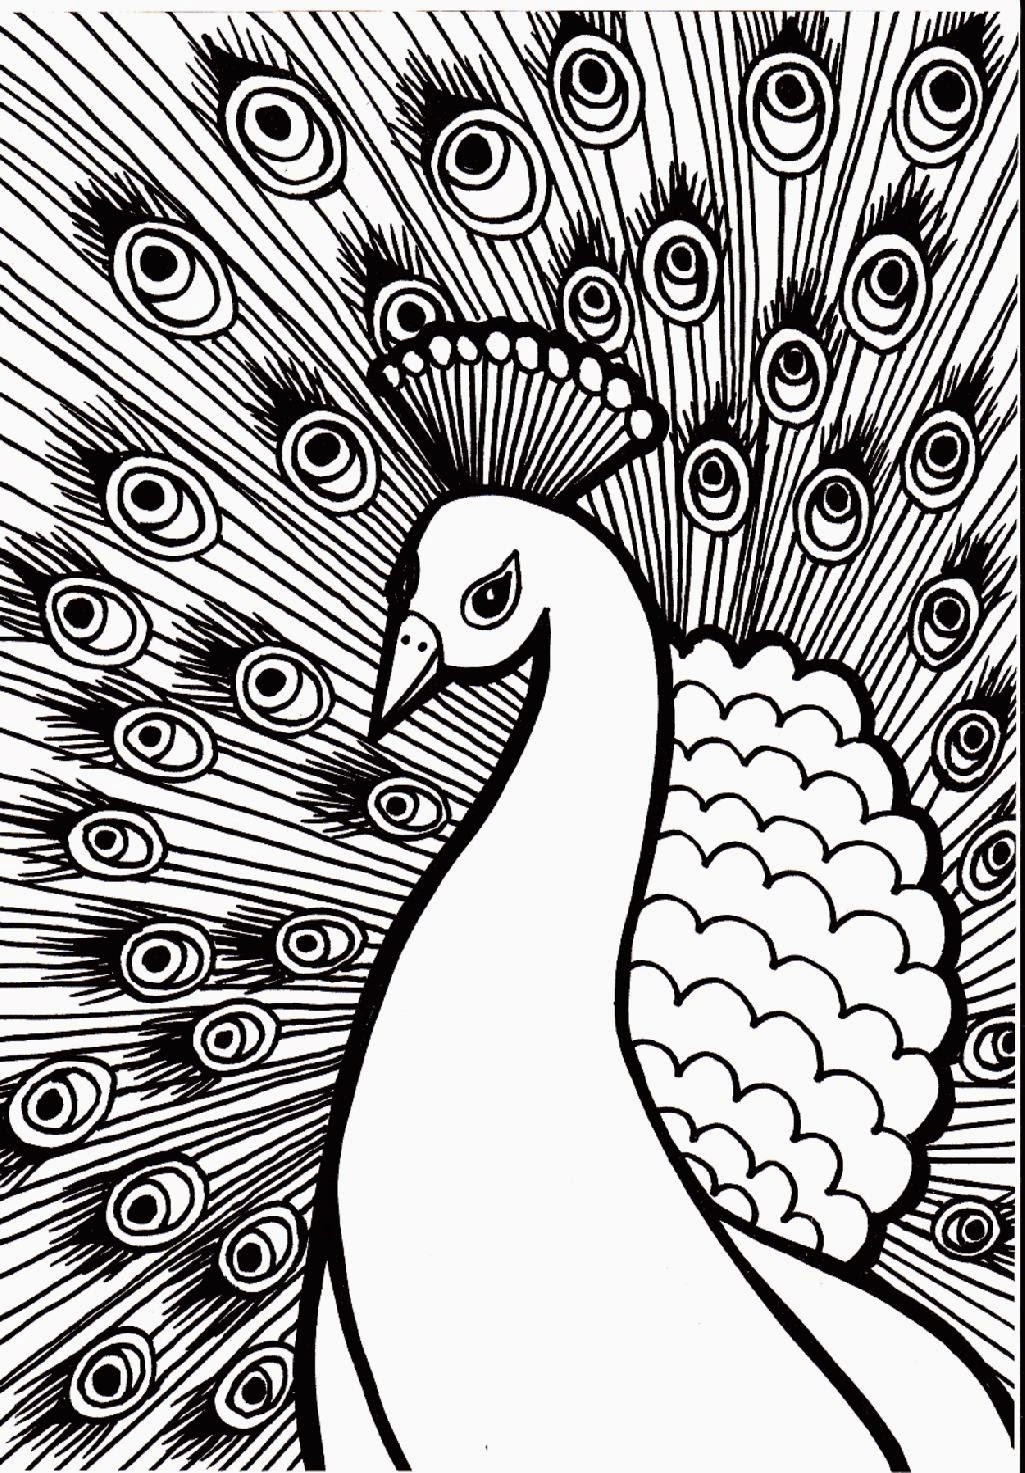 Printable Coloring Pages Of Peacocks
 38 Unique Peacock Coloring Pages For Kids Gianfreda